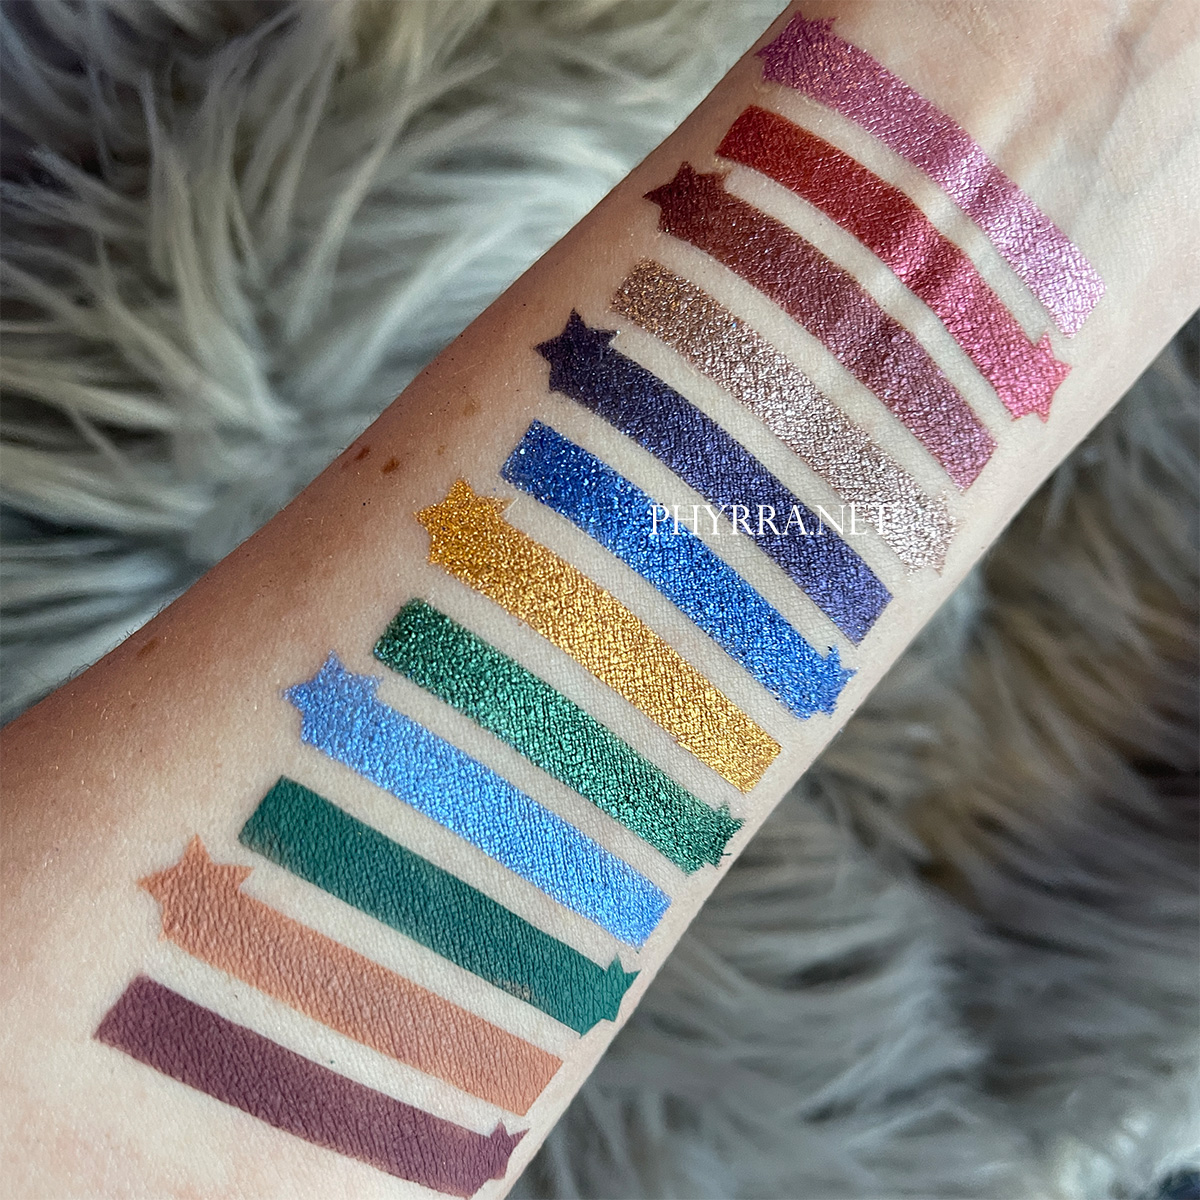 Sydney Grace Co Radiant Reflection Swatches on Pale Skin